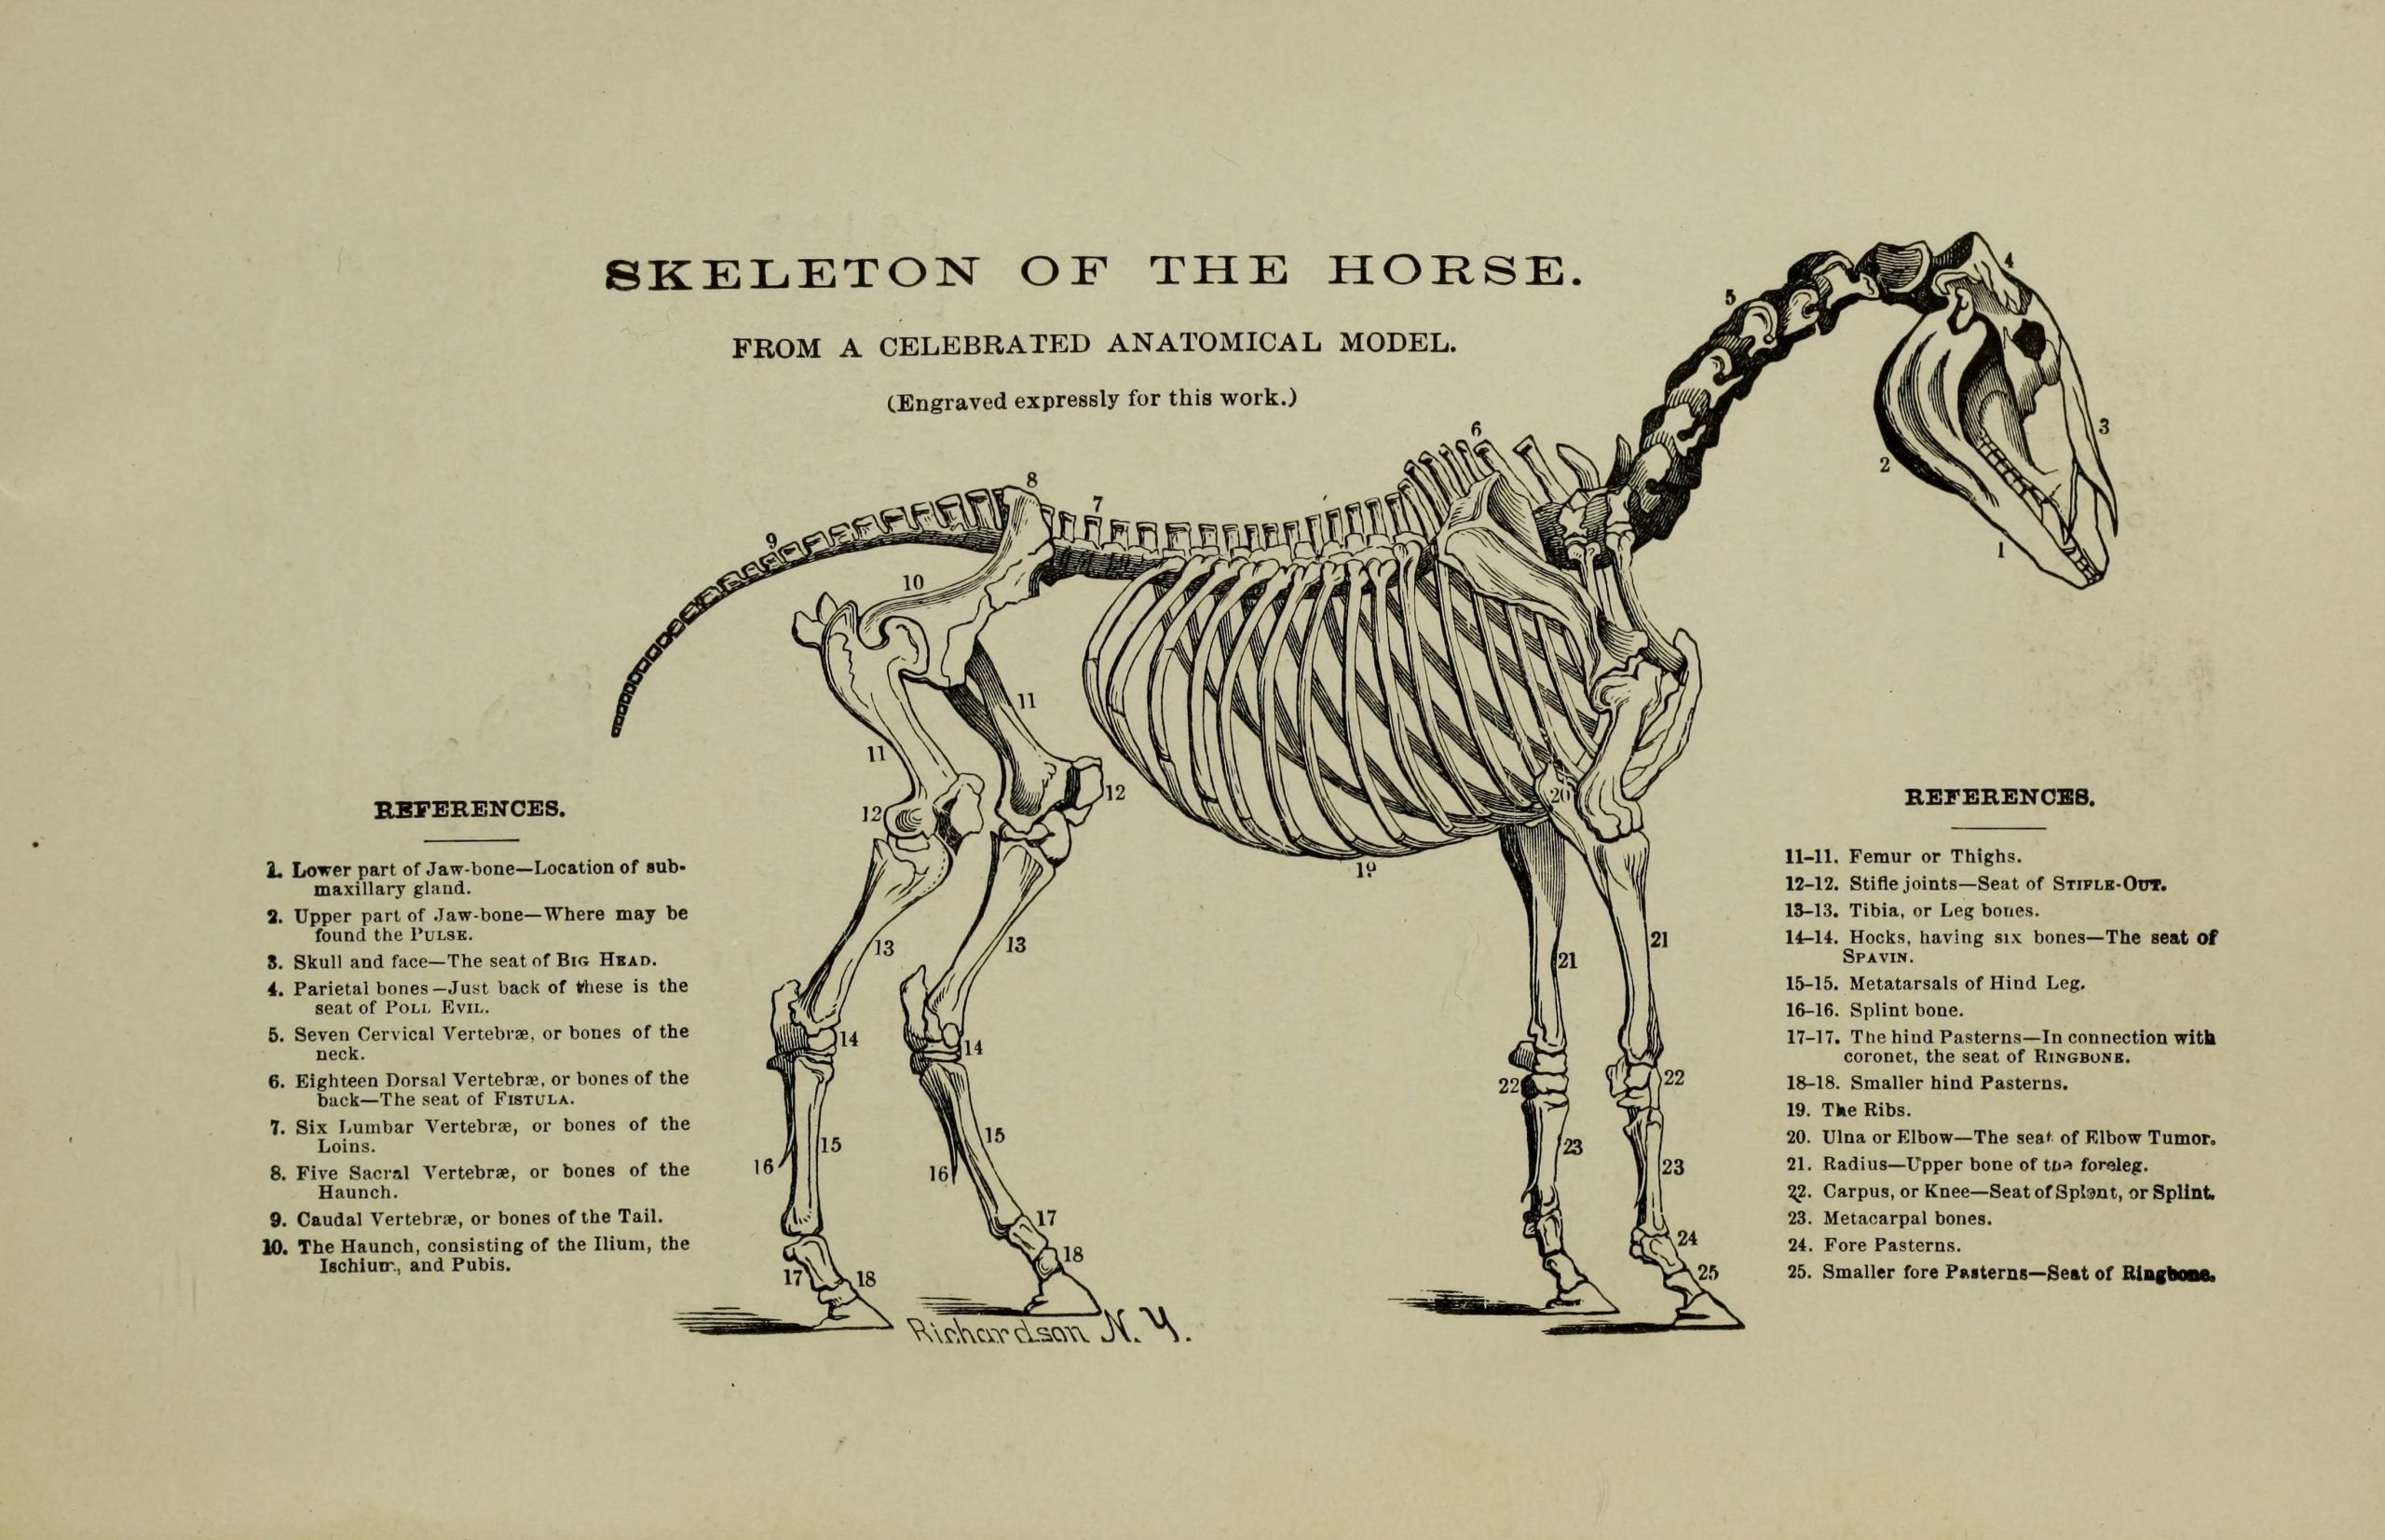 The American reformed horse book a treatise on the causes symptoms and cure of all diseases of the horse including every disease peculiar to America also embracing full information on breeding %